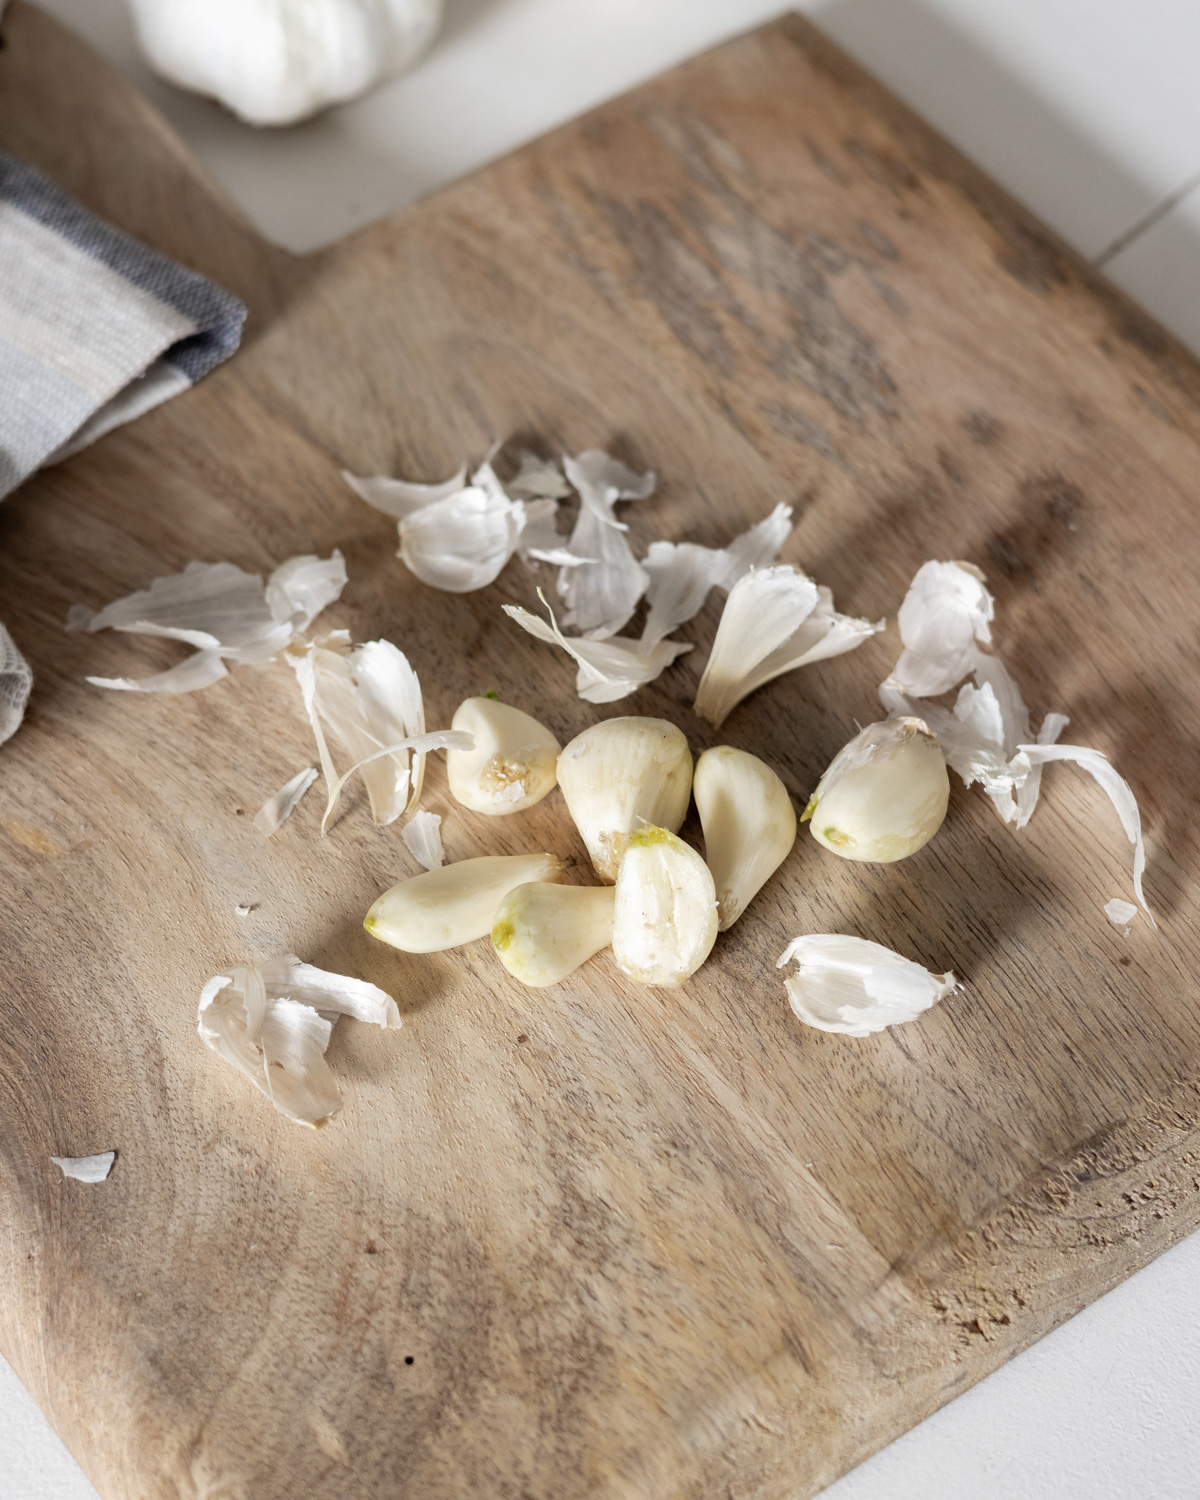 Peeled garlic with the skins removed.